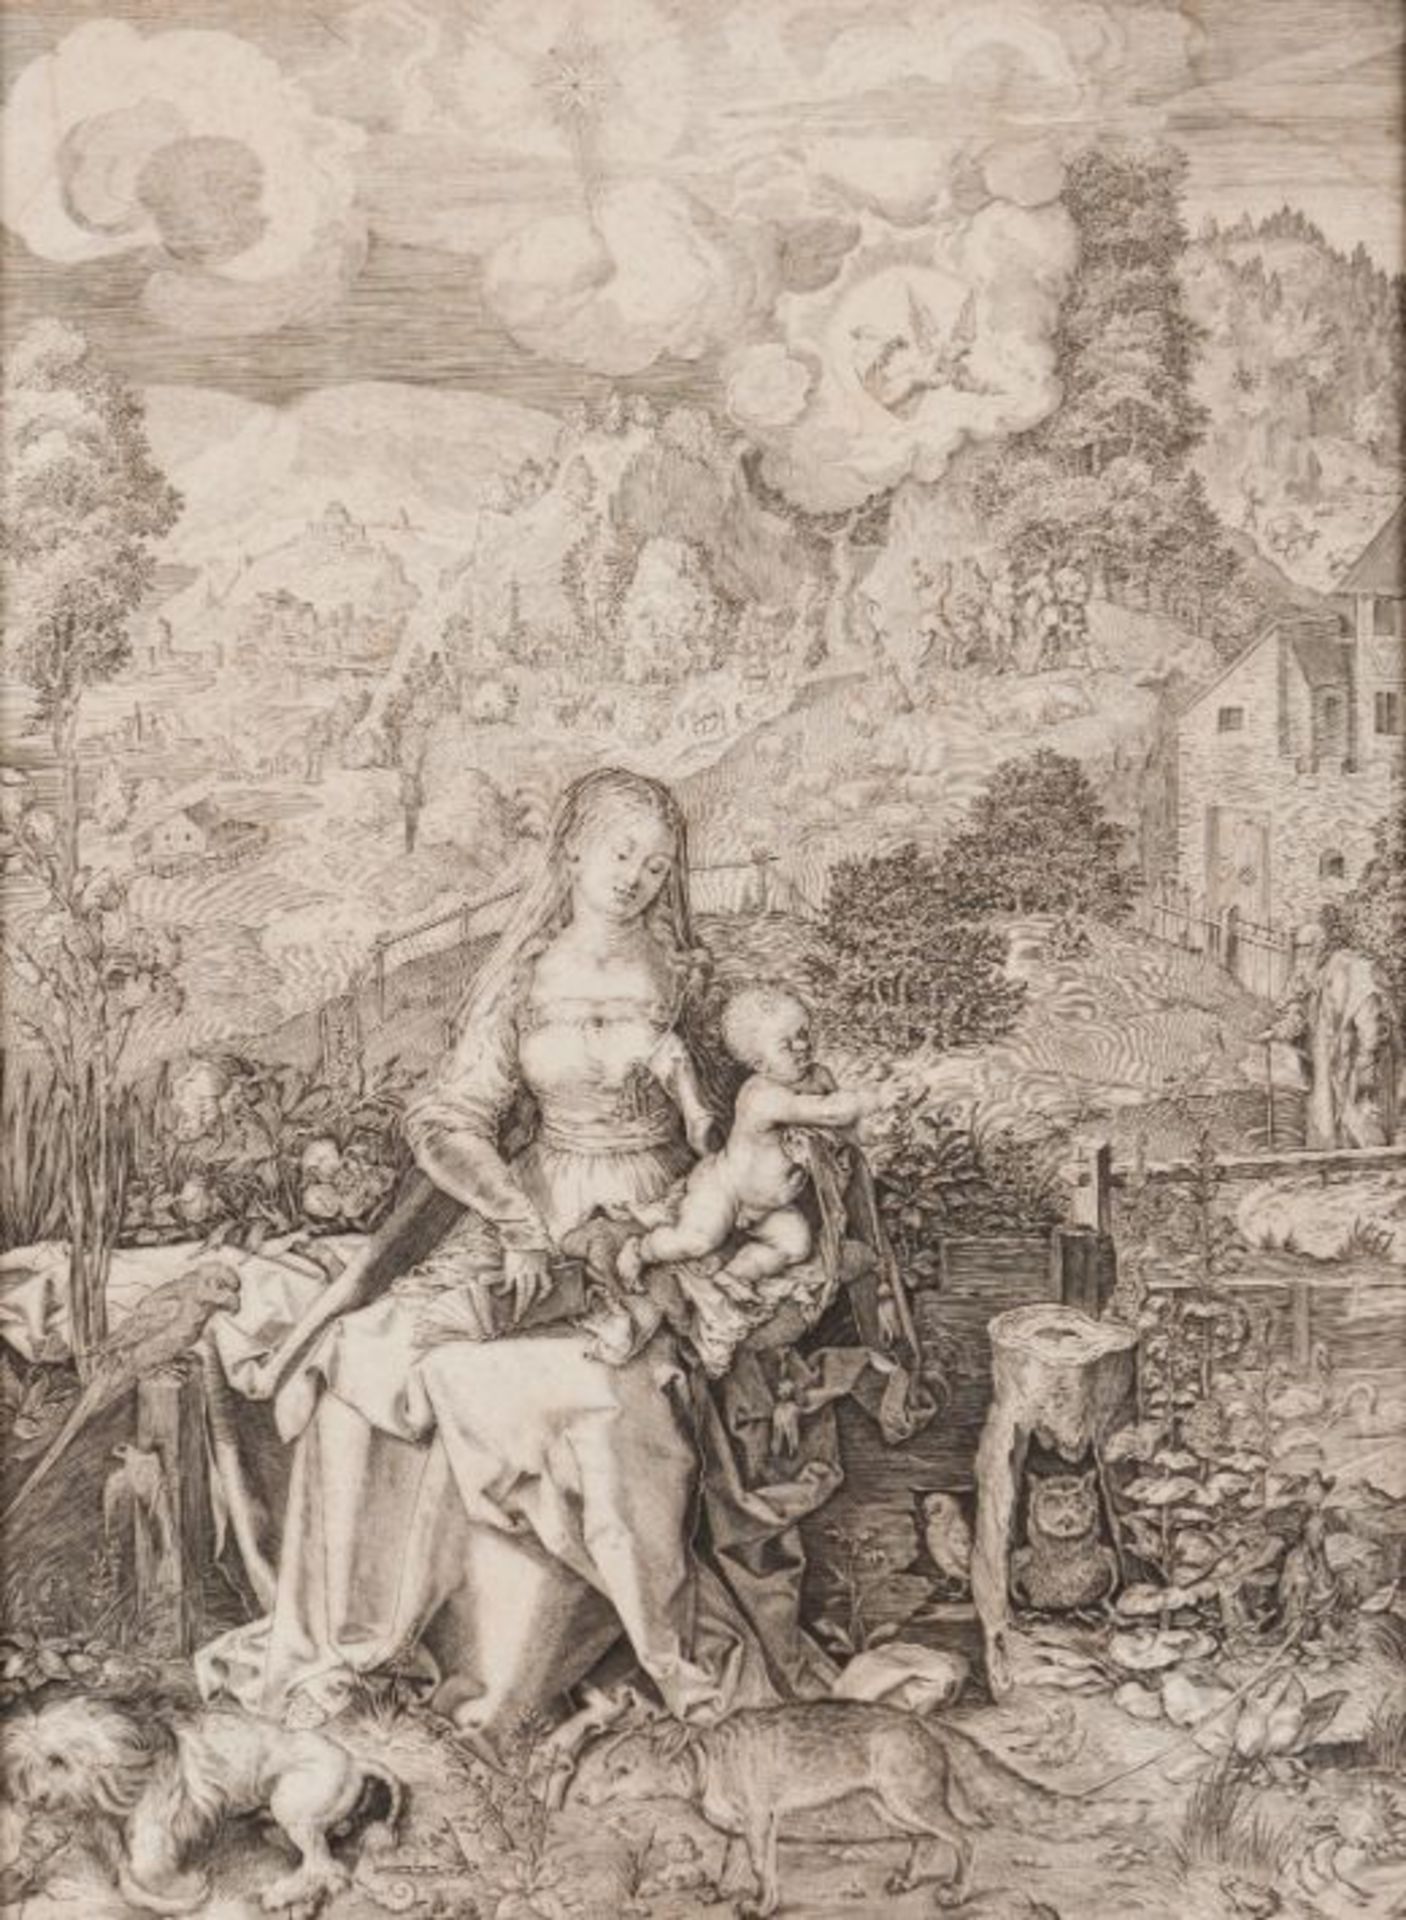 The Virgin Mary with The Child Jesus and landscapeBlack print on paper After drawing by Albrecht